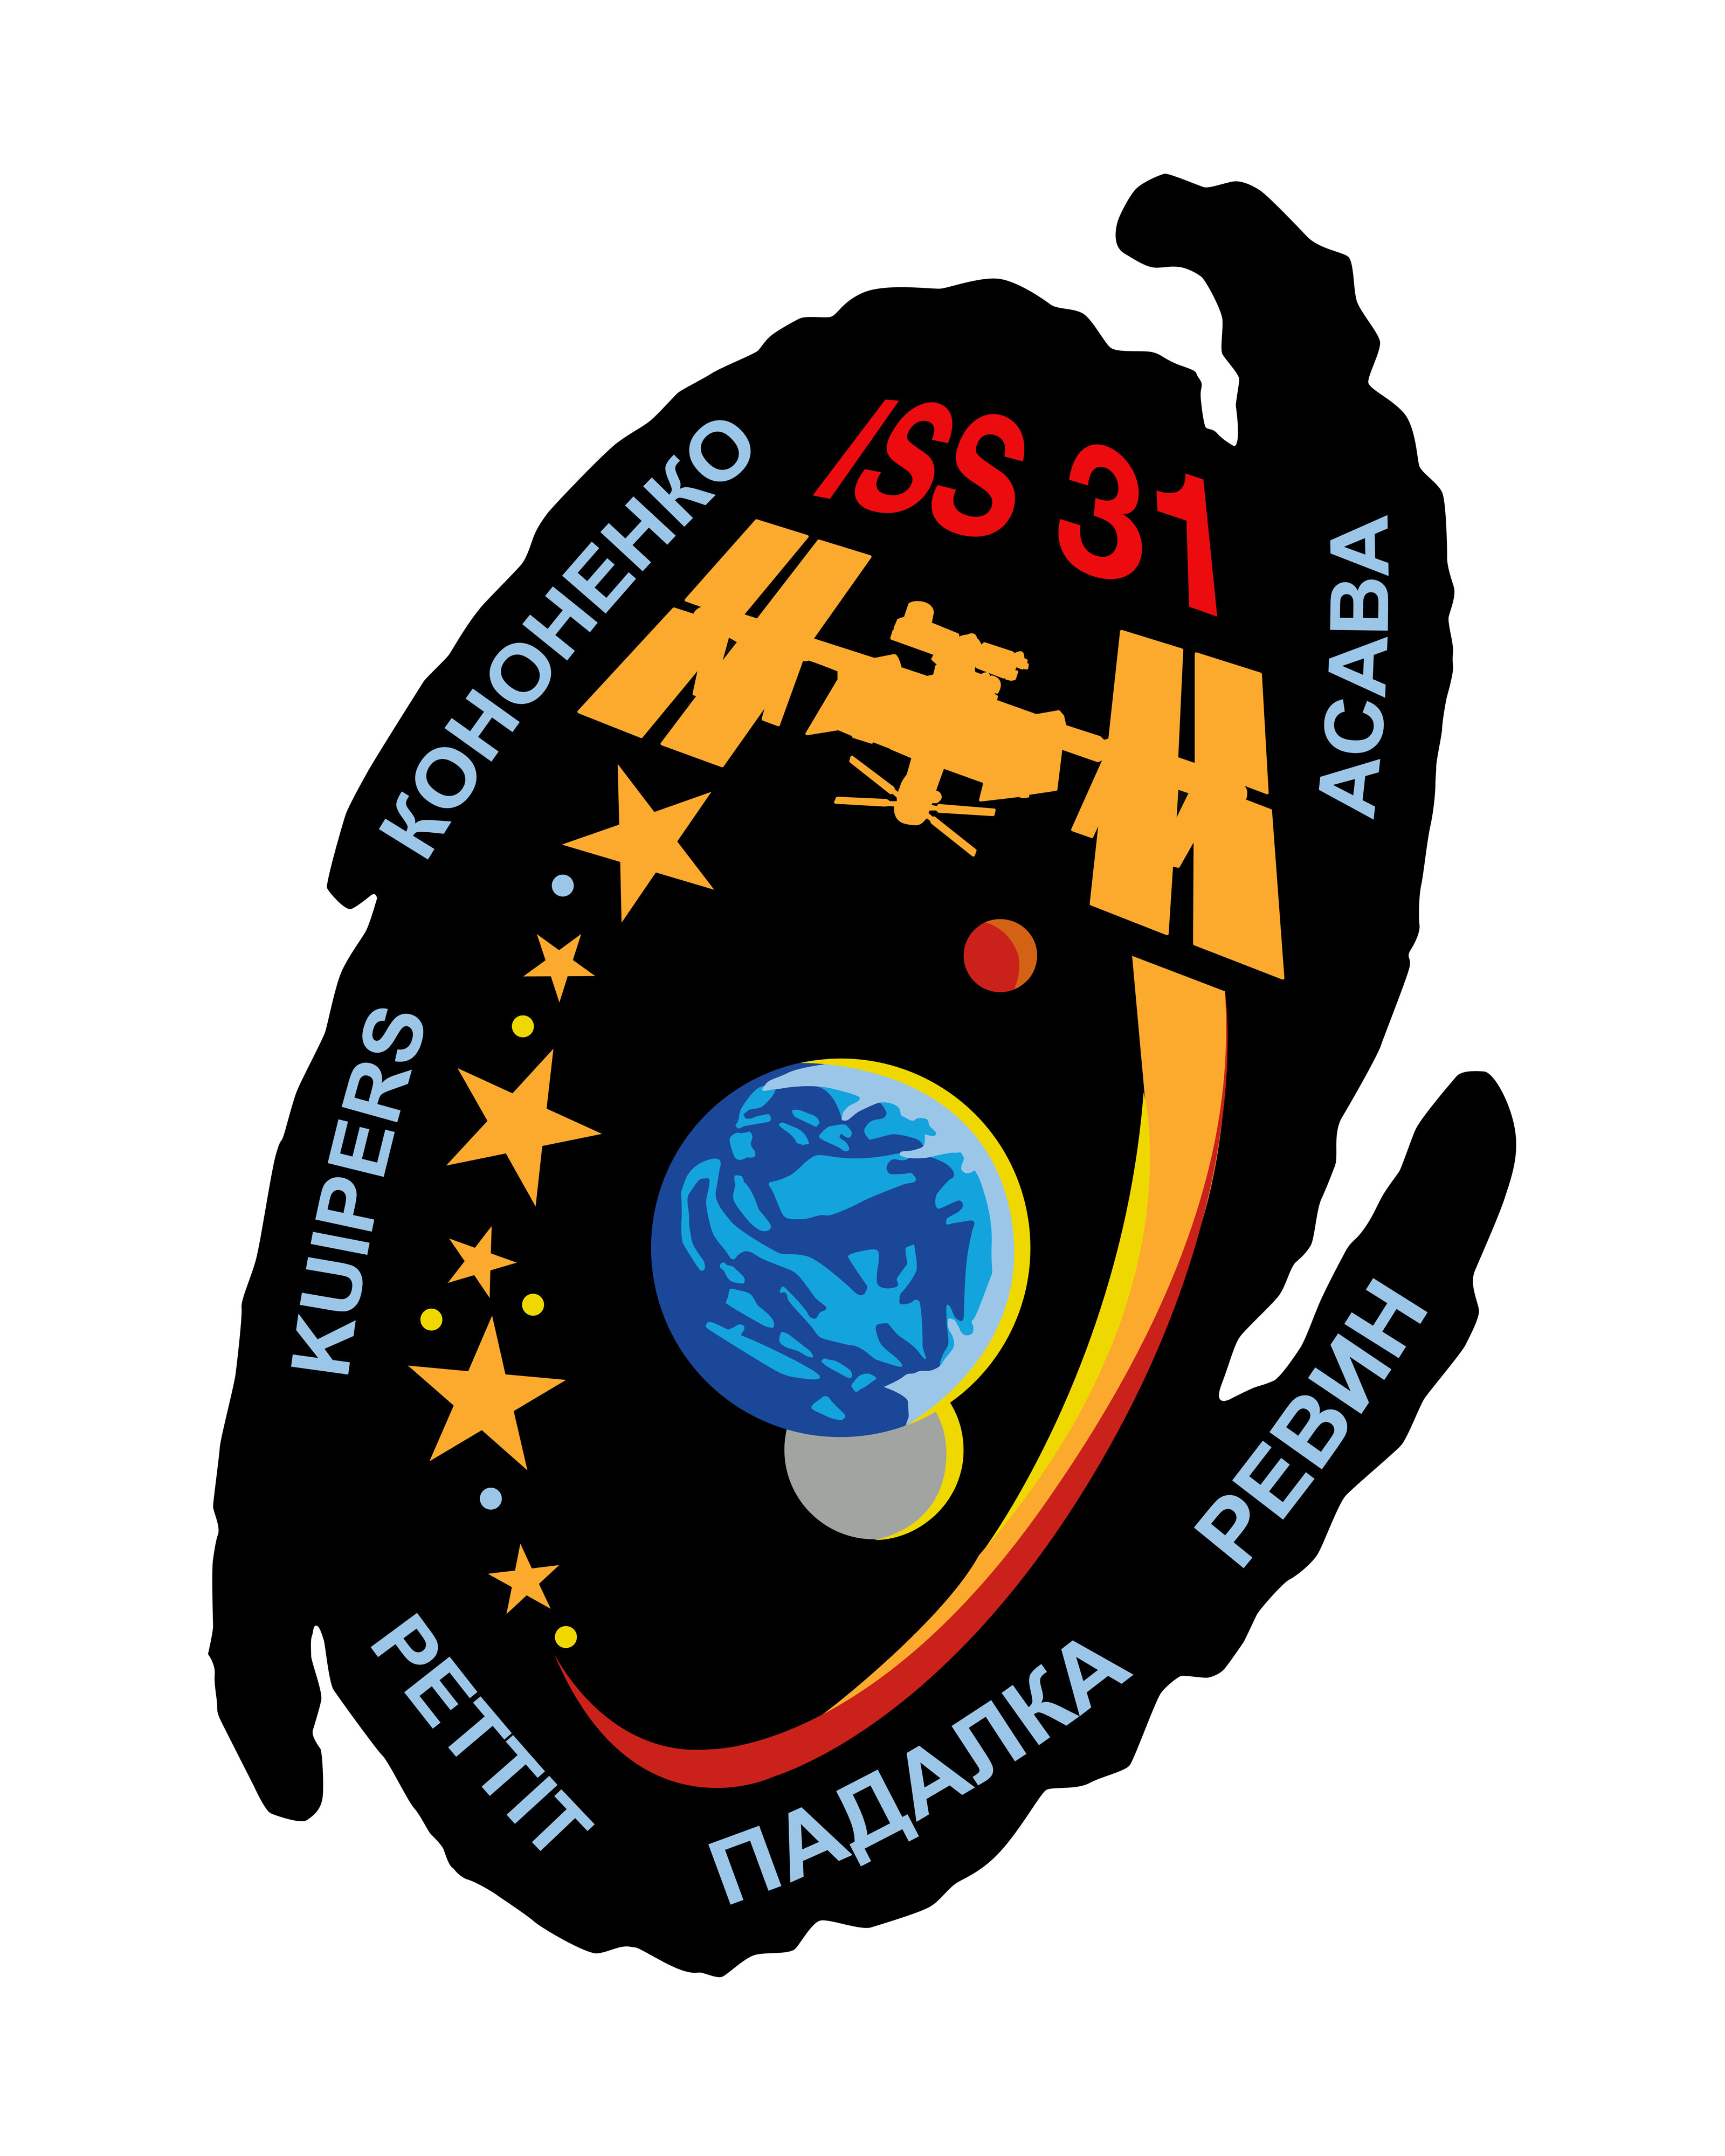 Expedition 31 Official Crew Insignia